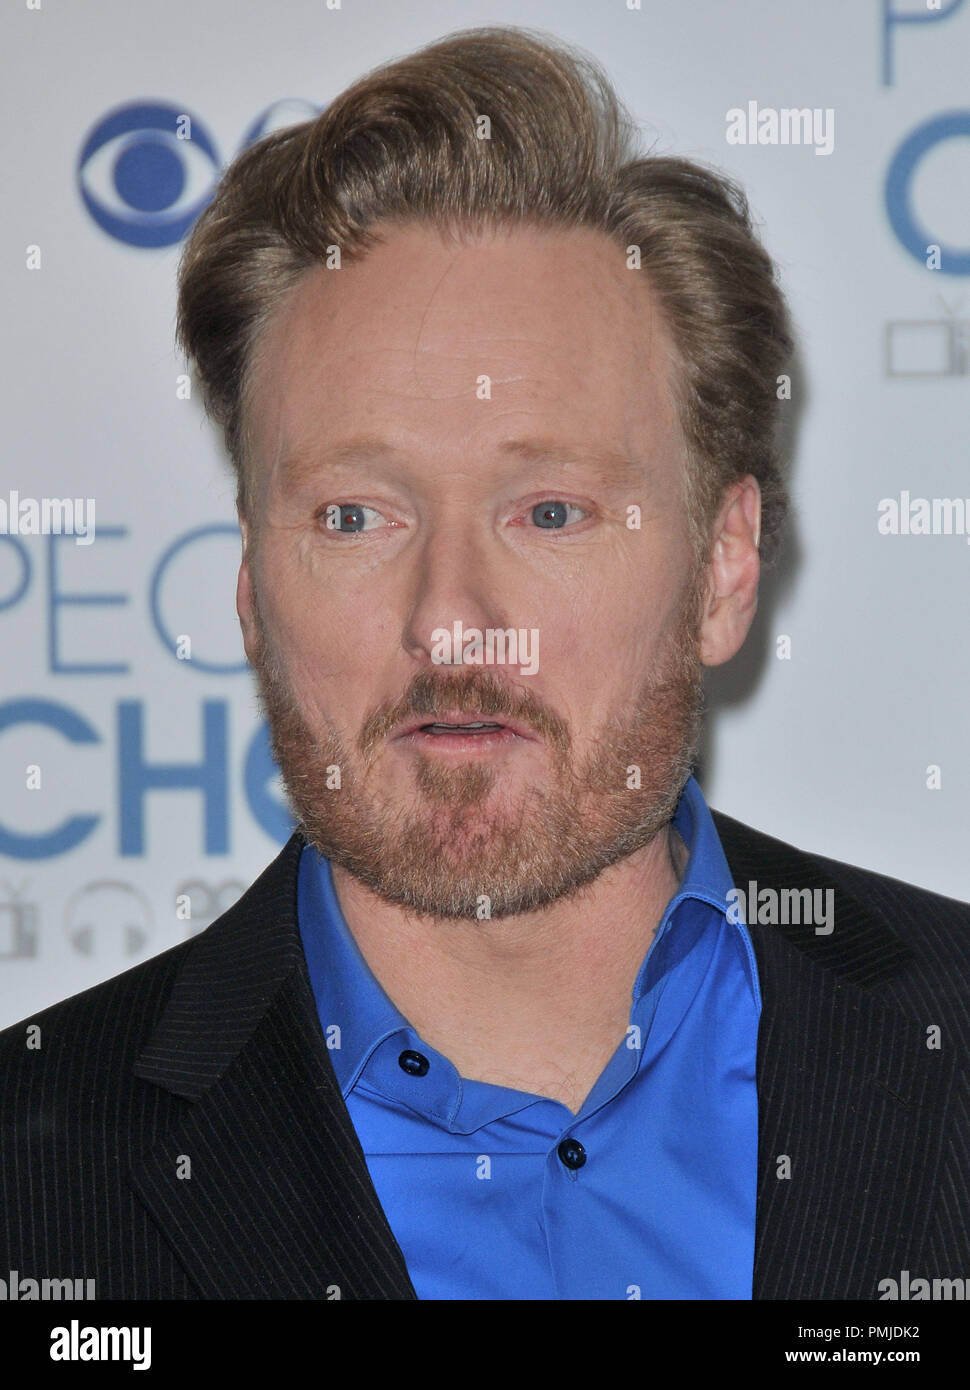 Conan O'Brien at the 2011 People's Choice Awards - Press Room held at the Nokia Theatre L.A. Live in Los Angeles, CA. The event took place on Wednesday, January 5, 2011. Photo by PRPP Pacific Rim Photo Press / PictureLux Stock Photo